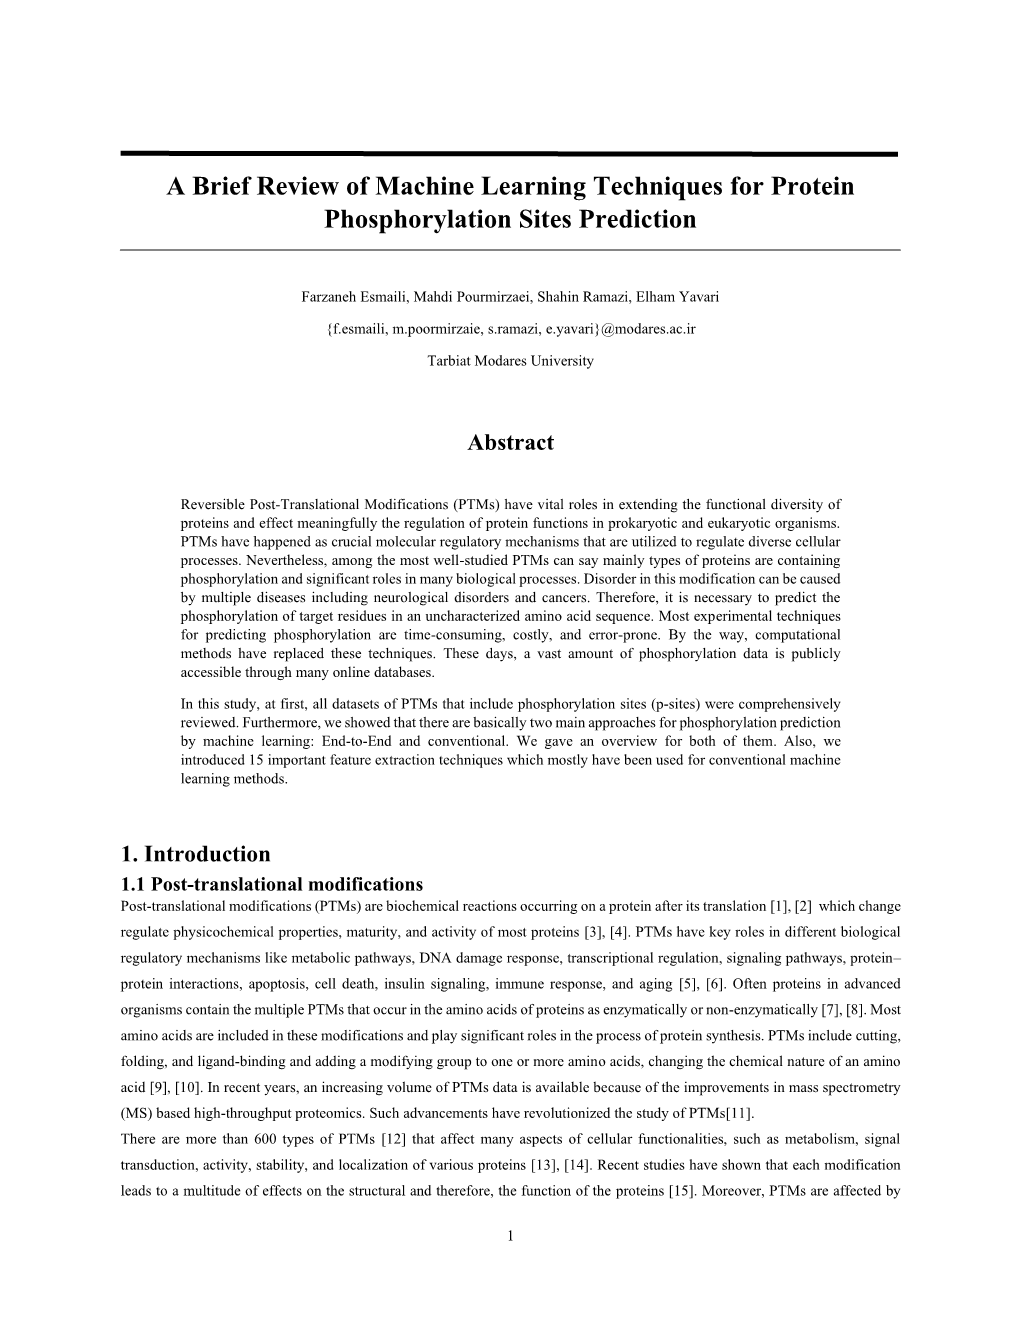 A Brief Review of Machine Learning Techniques for Protein Phosphorylation Sites Prediction